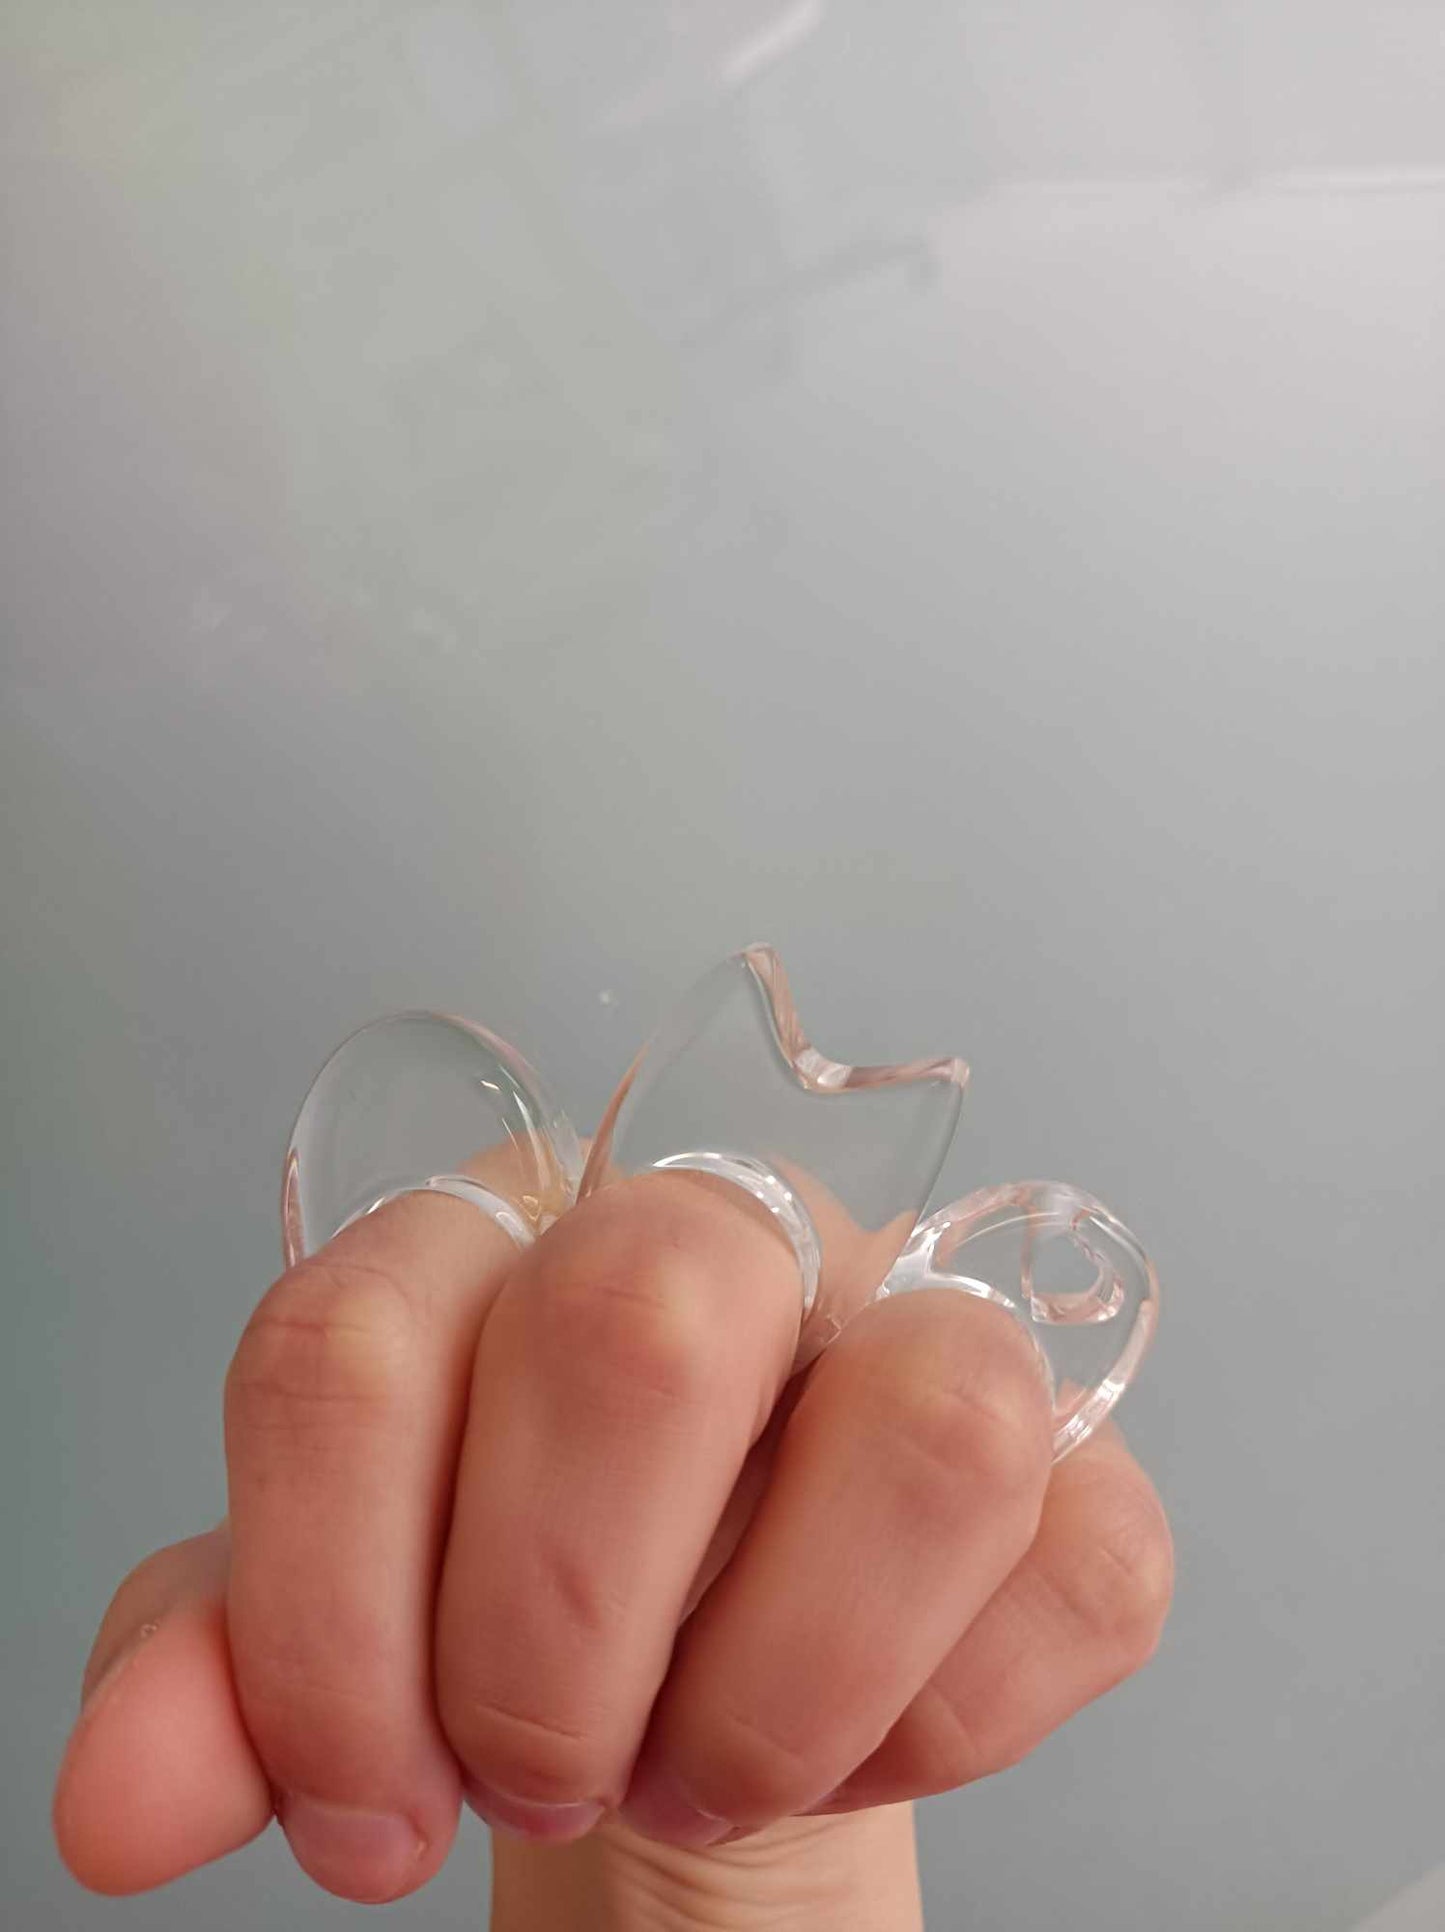 Clear Acrylic Ring, Oval Bold Transparent Ring, Lucite Statement Ring